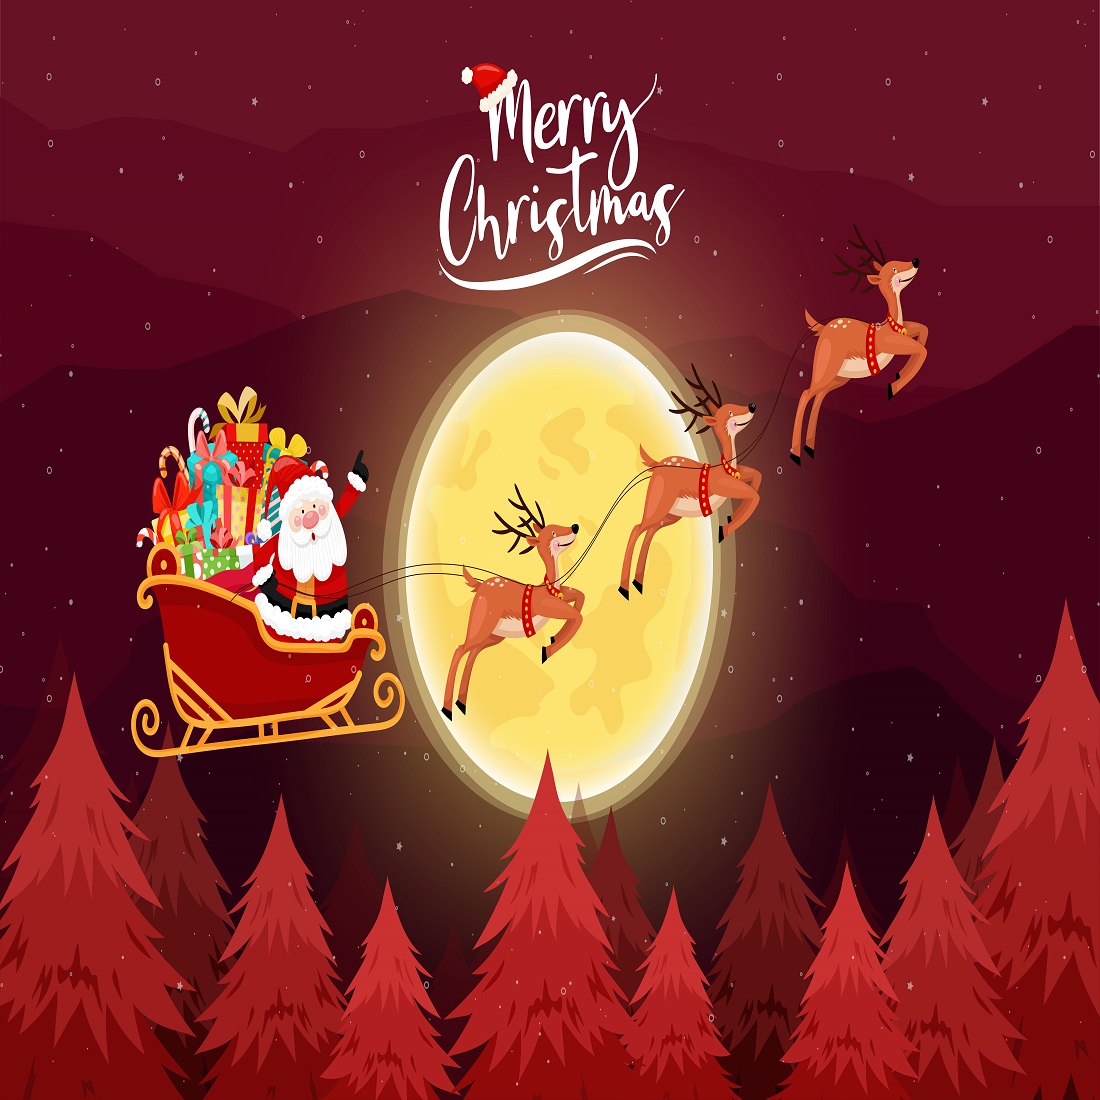 Merry Christmas card with Santa must ride sleigh preview image.